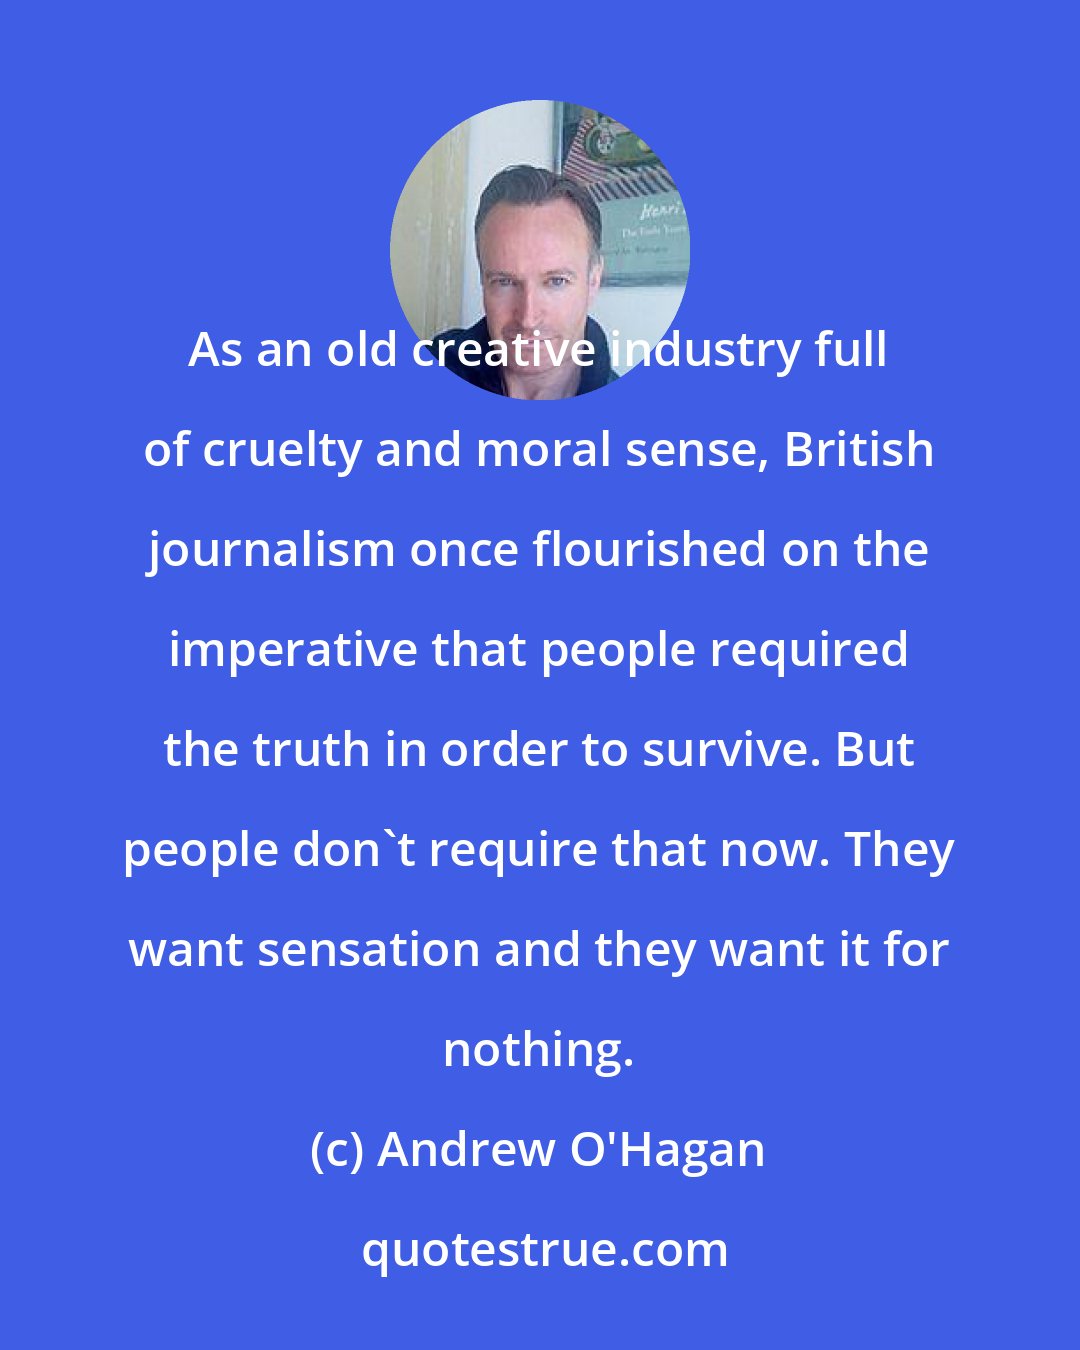 Andrew O'Hagan: As an old creative industry full of cruelty and moral sense, British journalism once flourished on the imperative that people required the truth in order to survive. But people don't require that now. They want sensation and they want it for nothing.